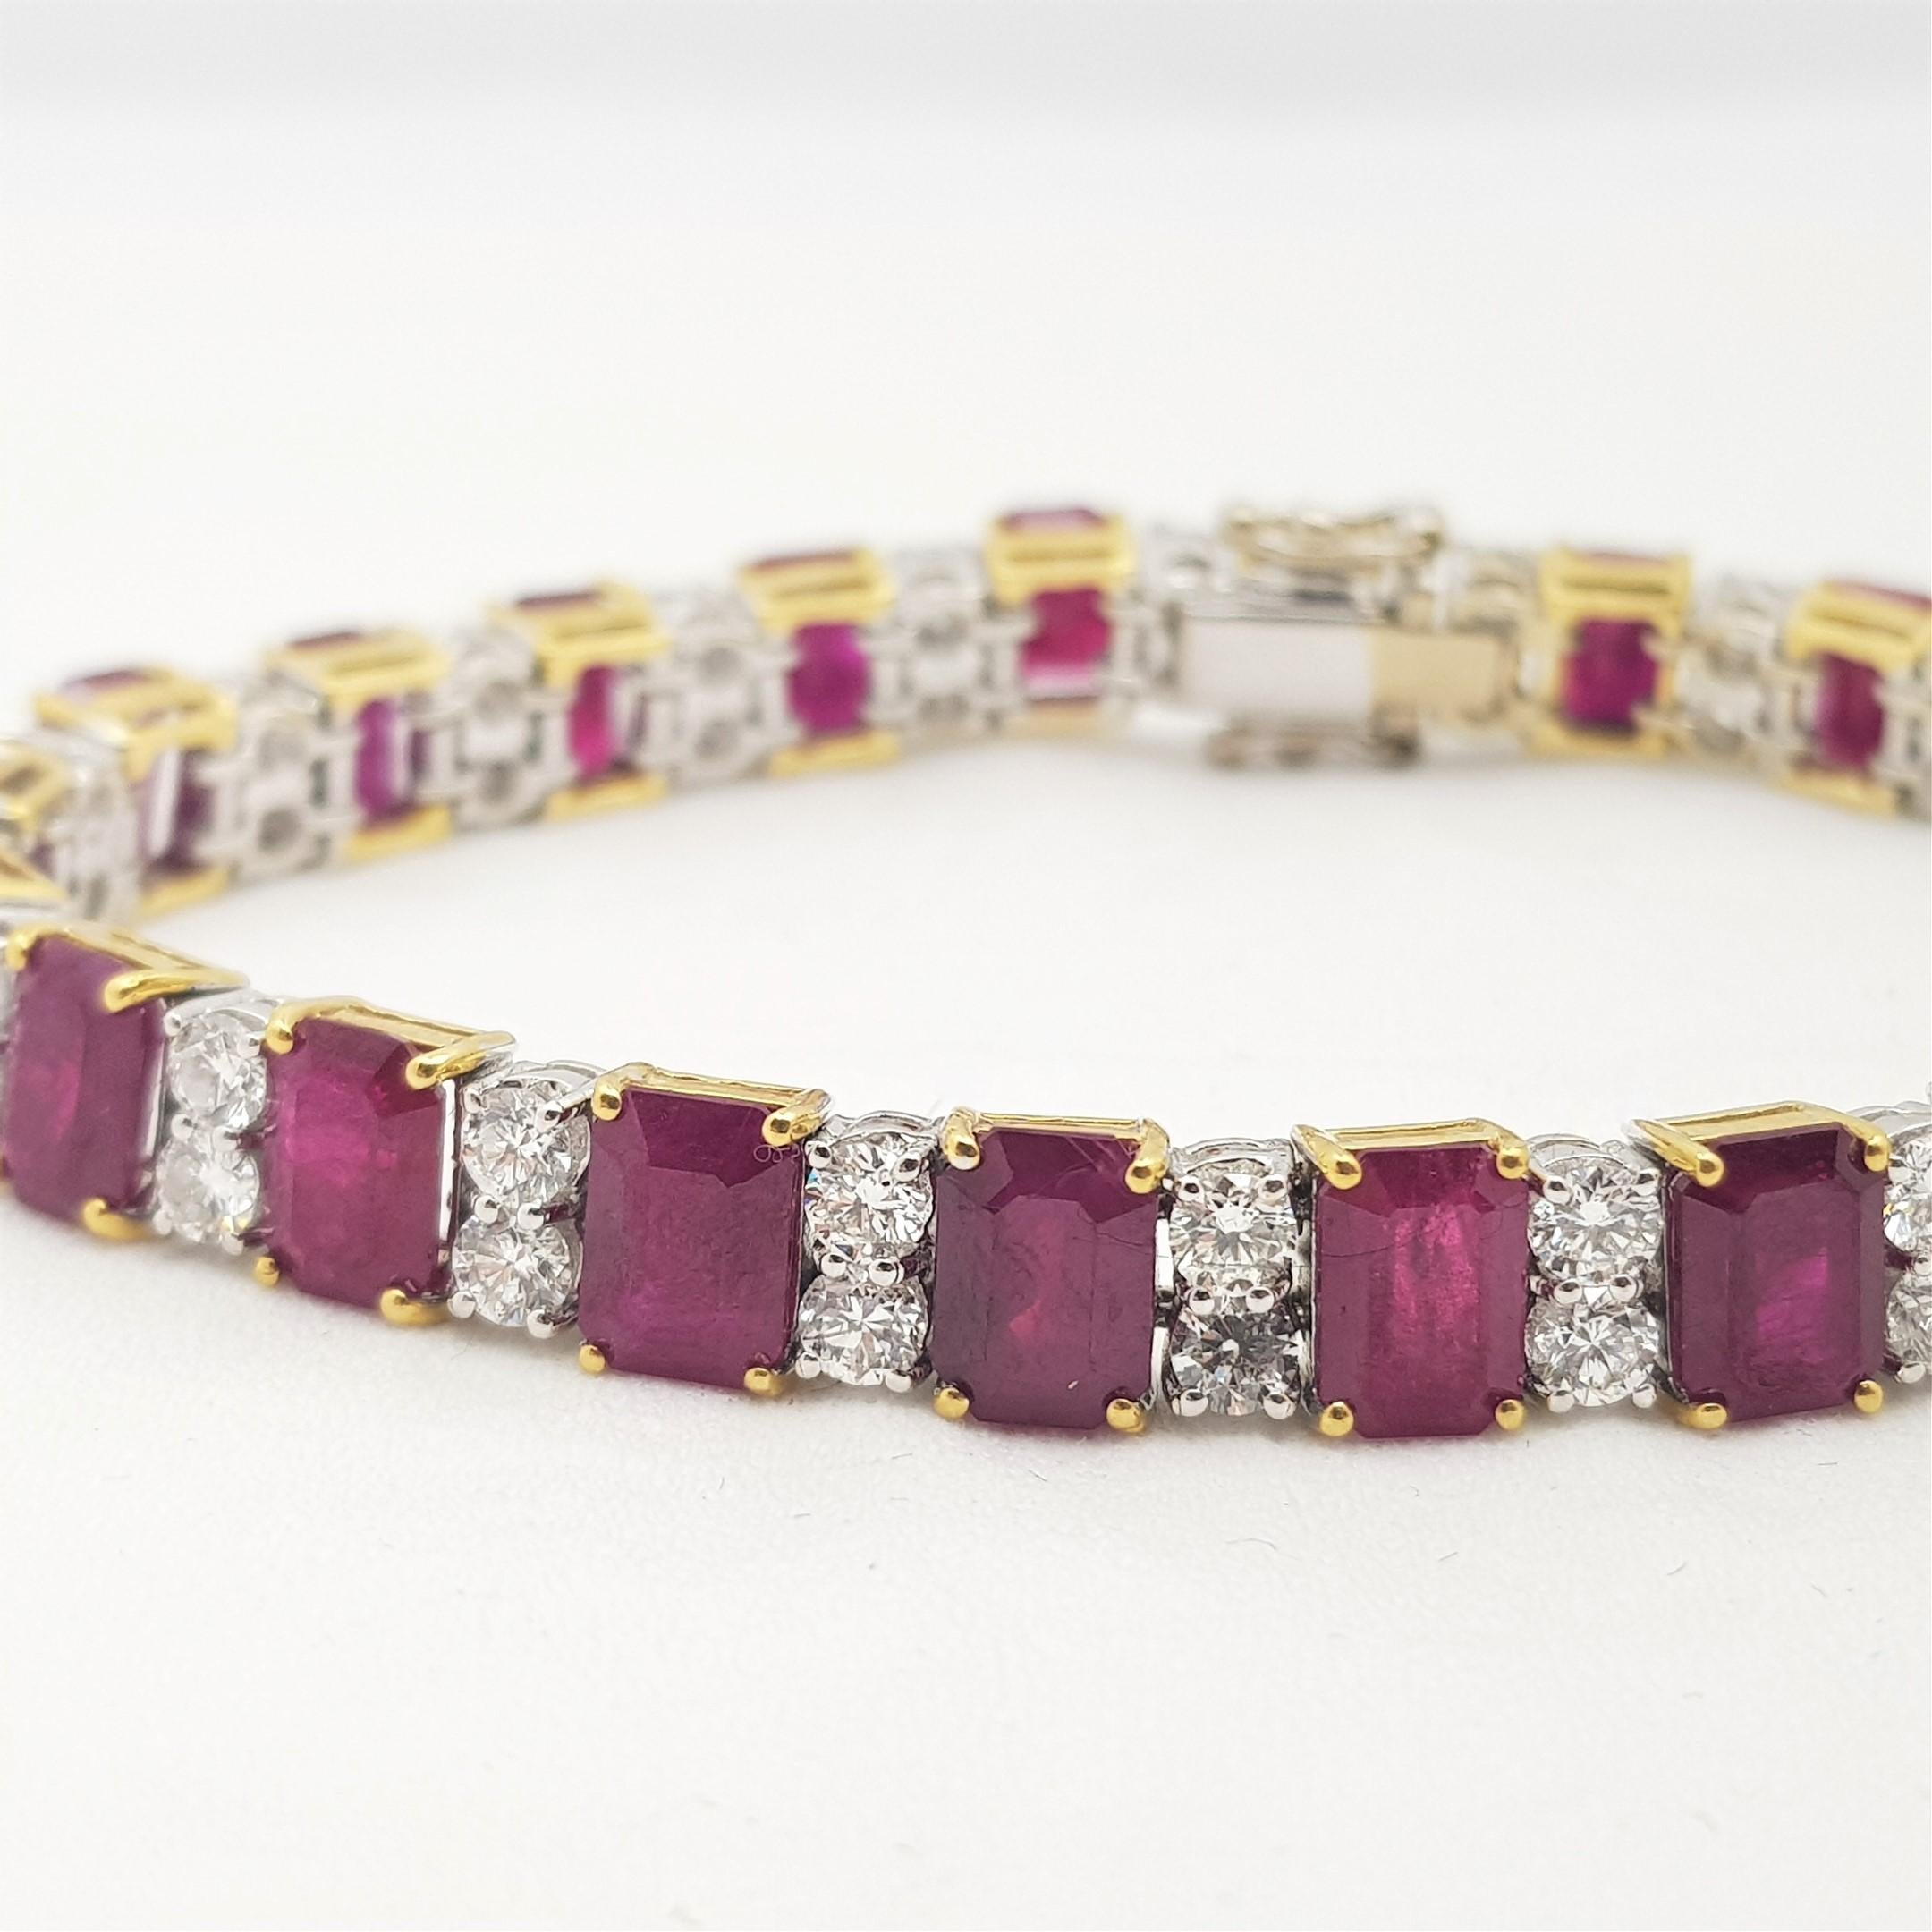 18ct Two Tone Gold Burmese Ruby & 4.5ct TW Diamond Bracelet Val $62765 AUD In Excellent Condition For Sale In FORTITUDE VALLEY, QLD